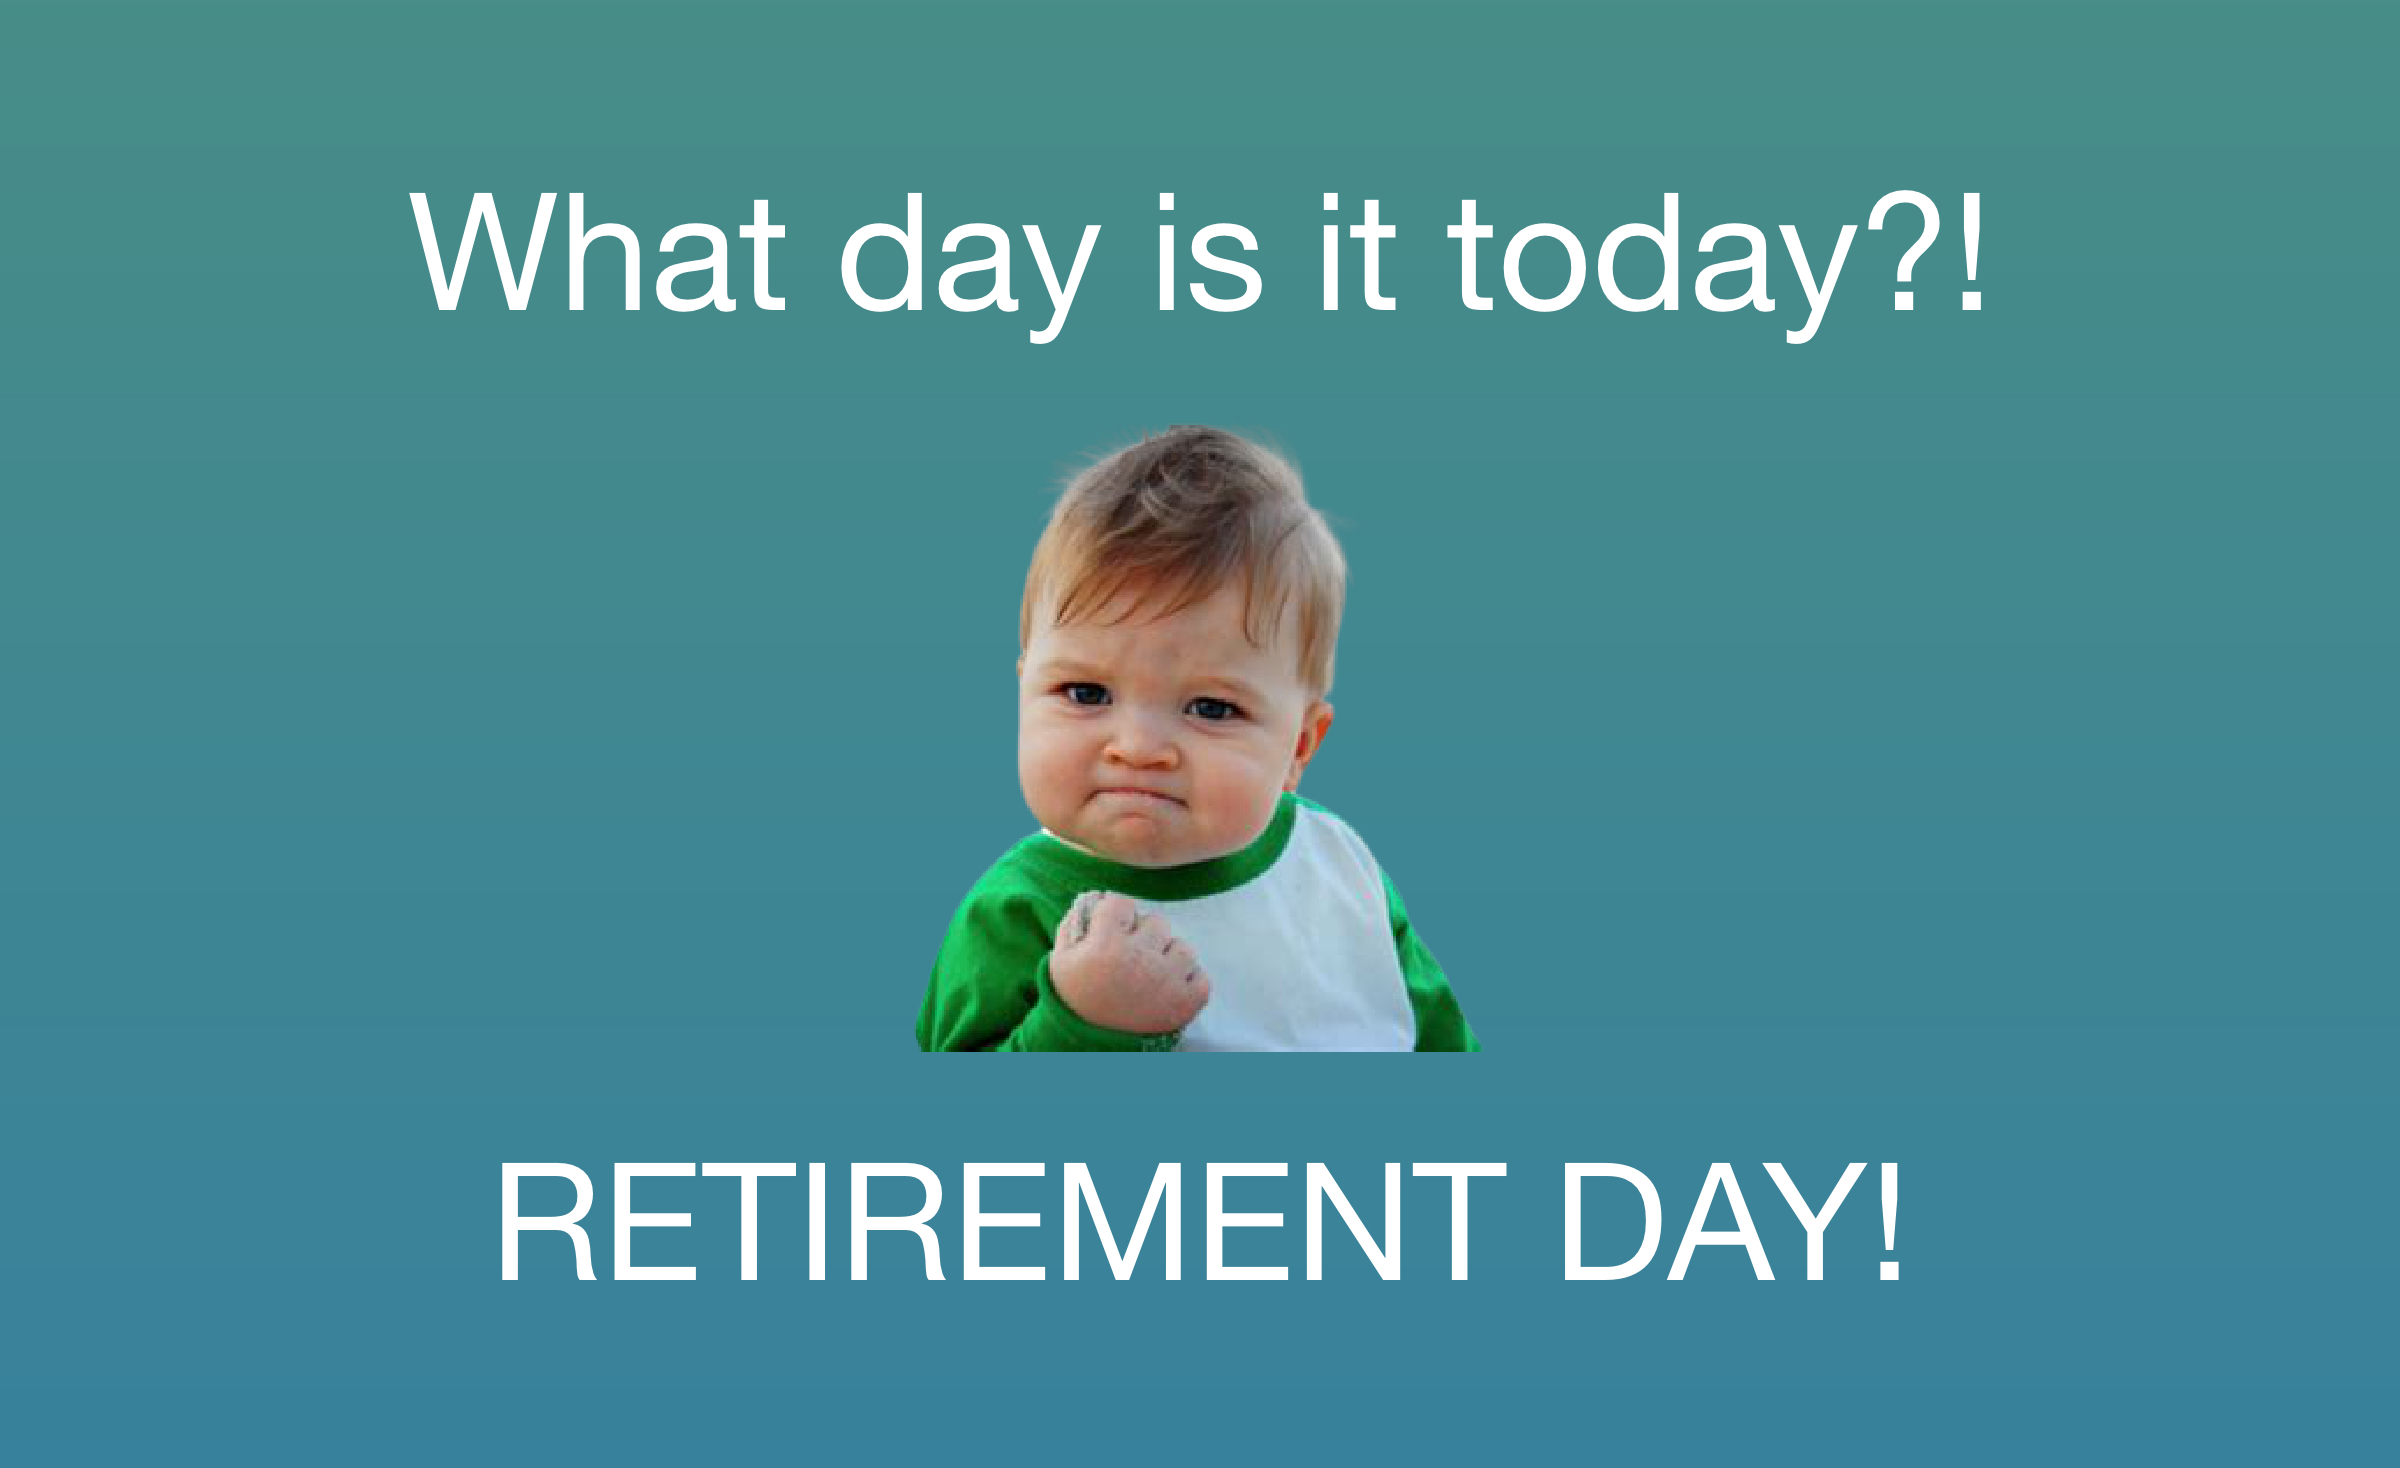 A picture of a baby and a quote saying what day is today, retirement day.